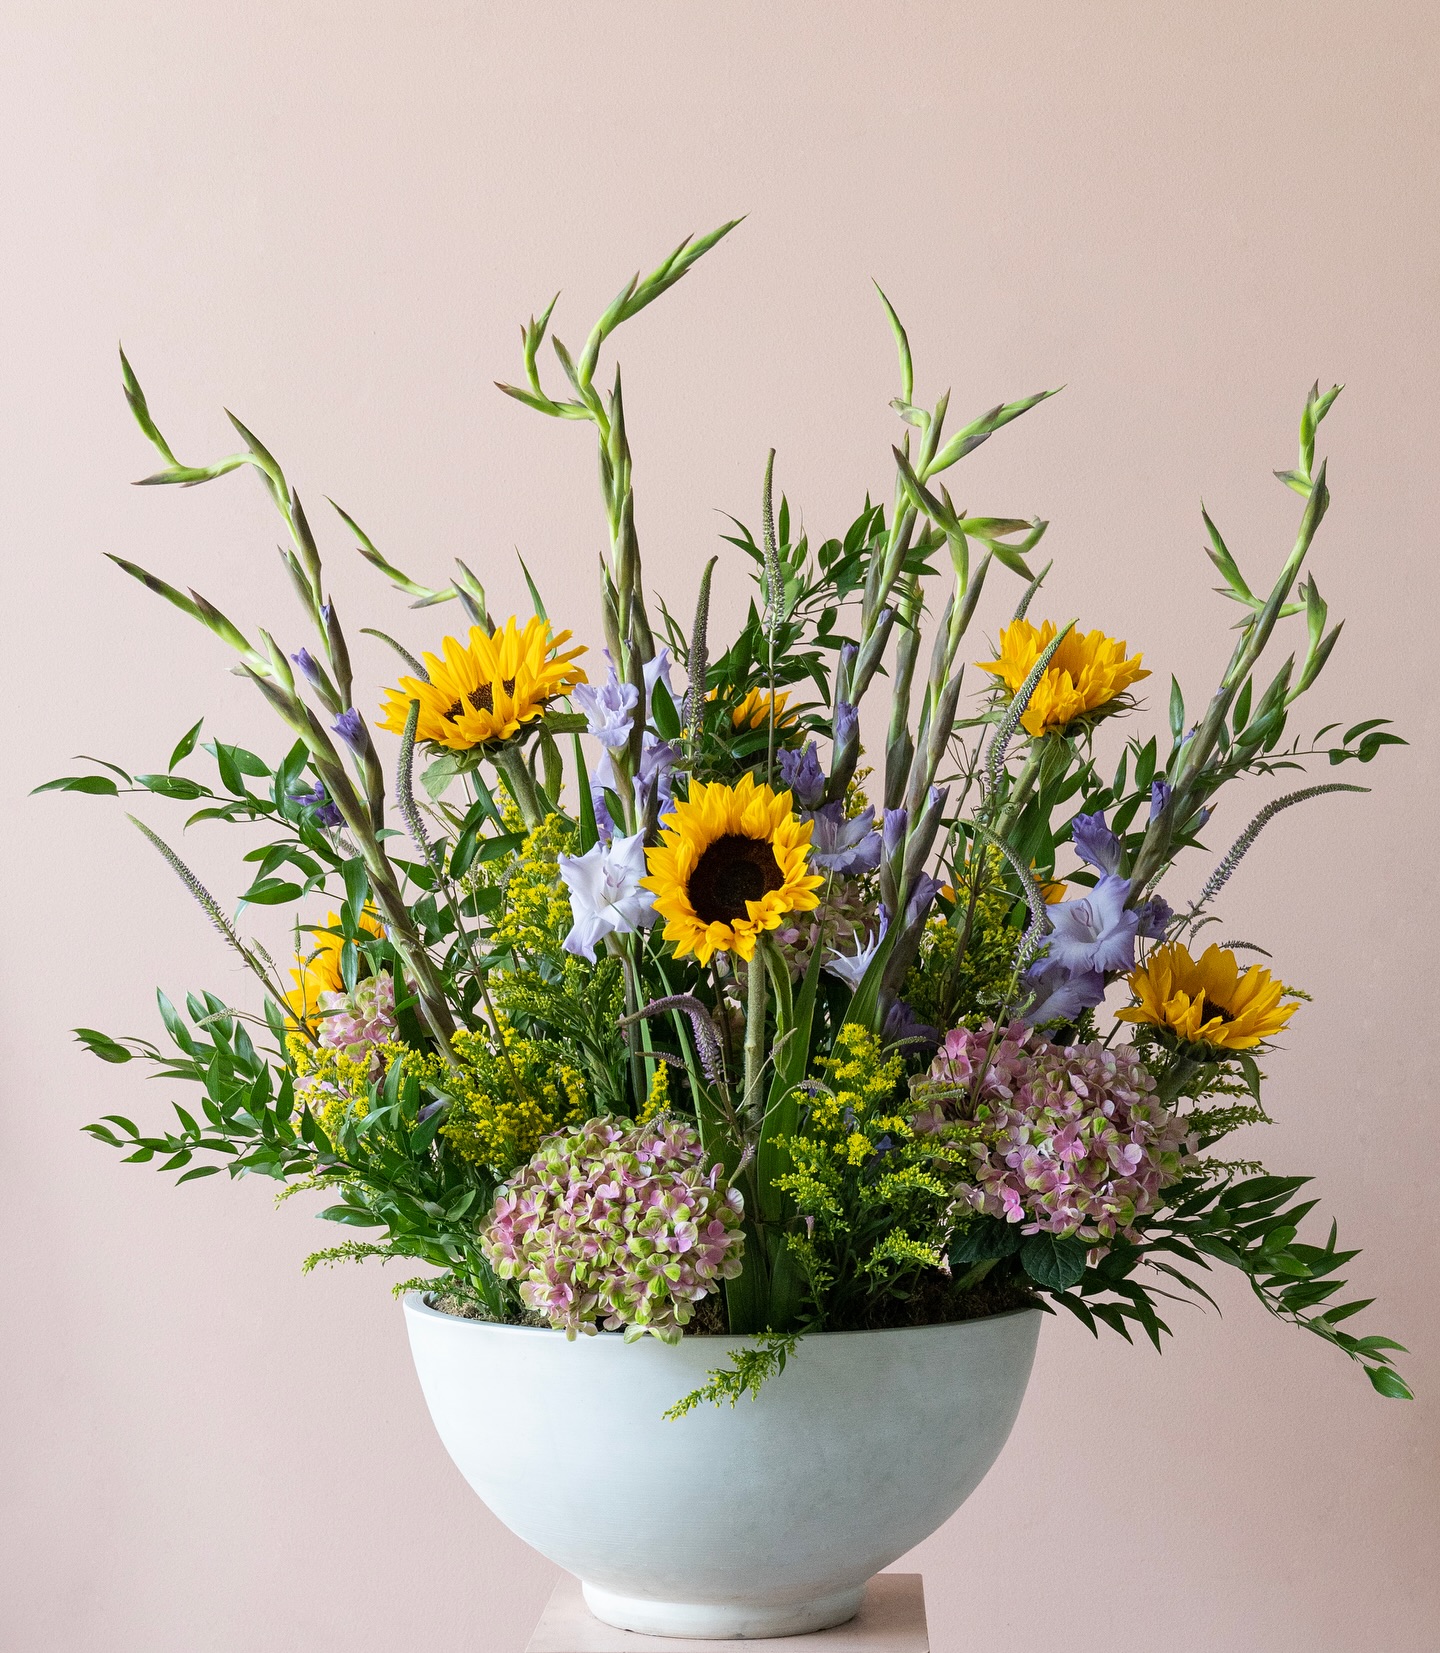 This arrangement feels just like the summer breeze 🌻🦋 Bring a cheerful touch of this season into your home now! ☀️

#AliaFlowers